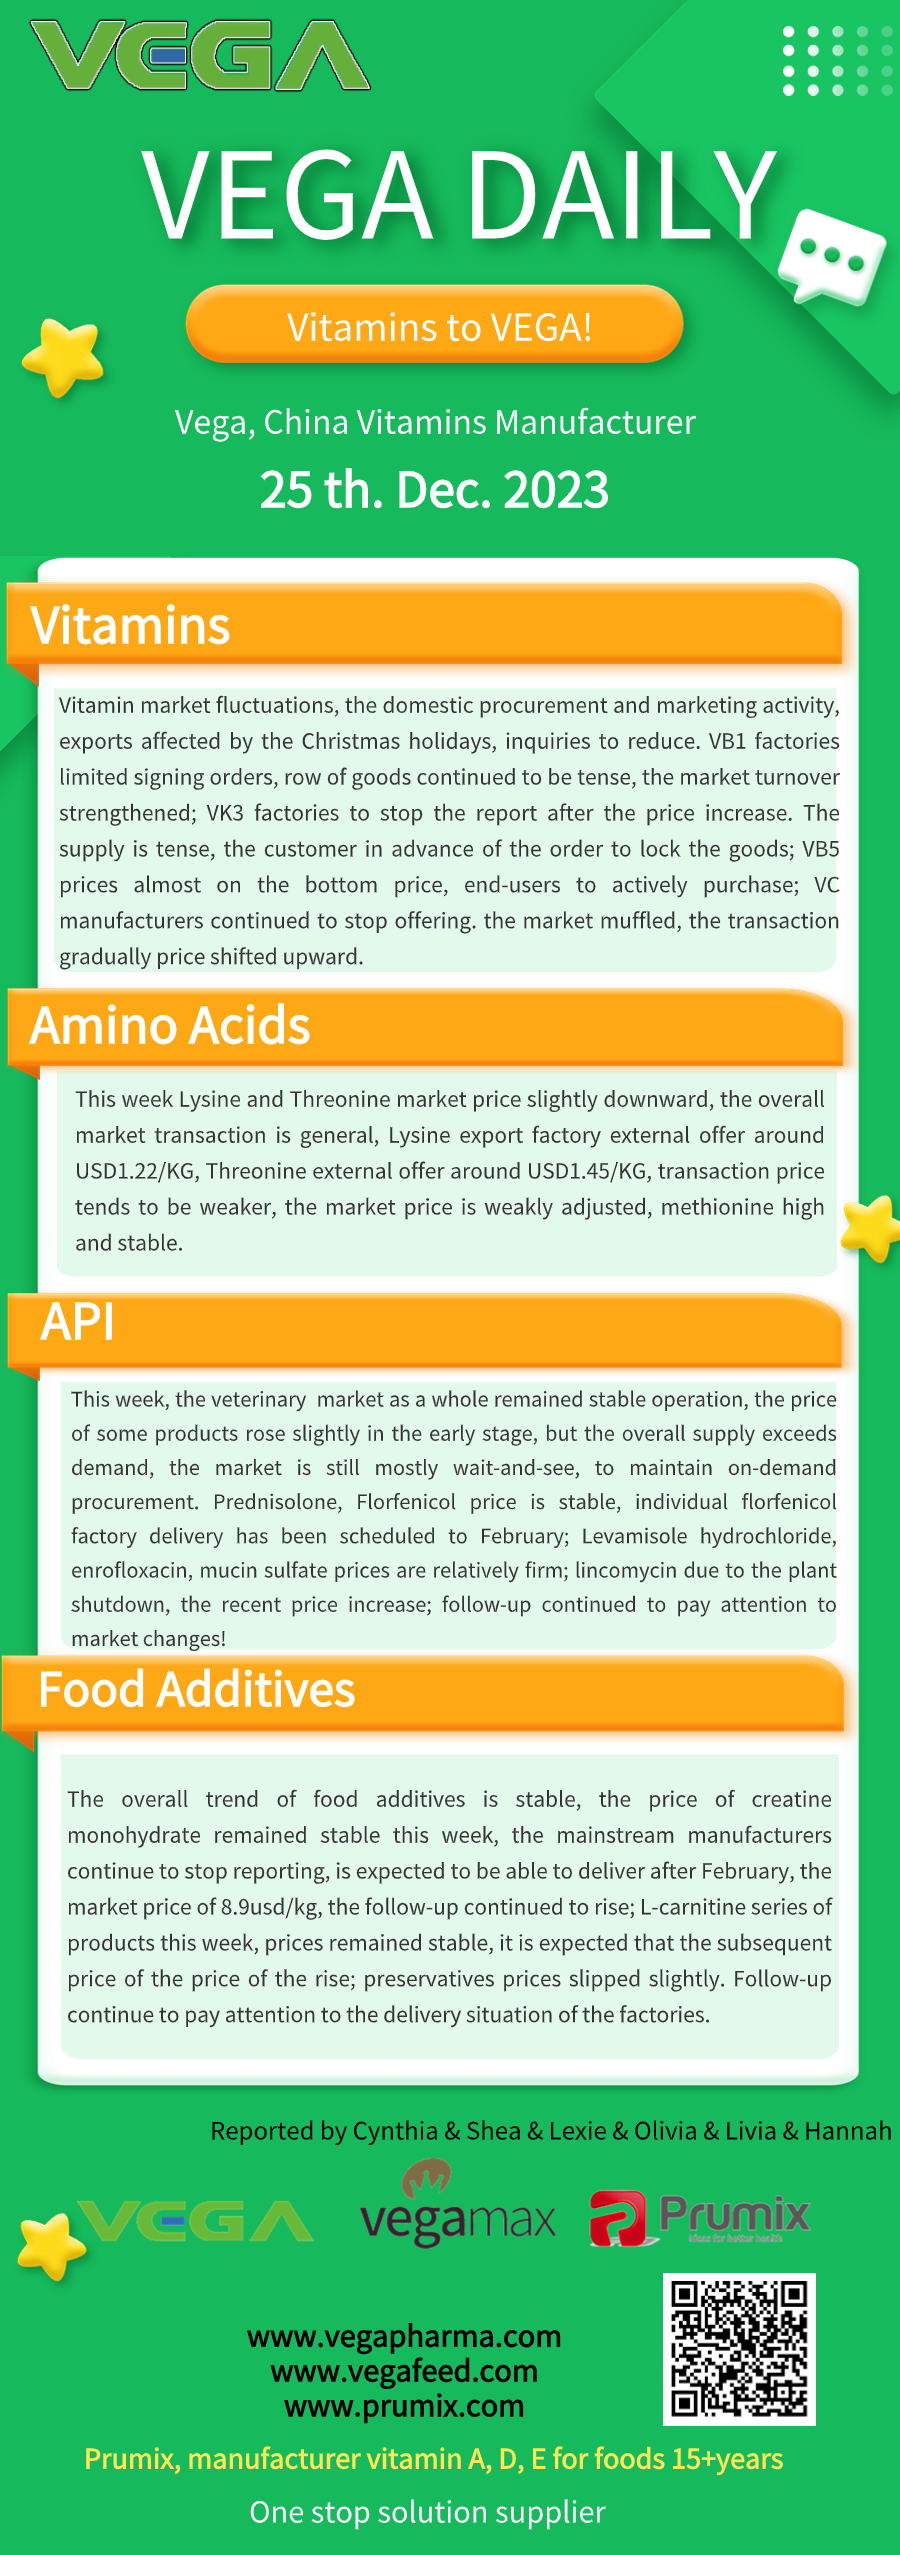 Vega Daily Dated on Dec 25th 2023 Vitamin Amino Acid APl Food Additives.png